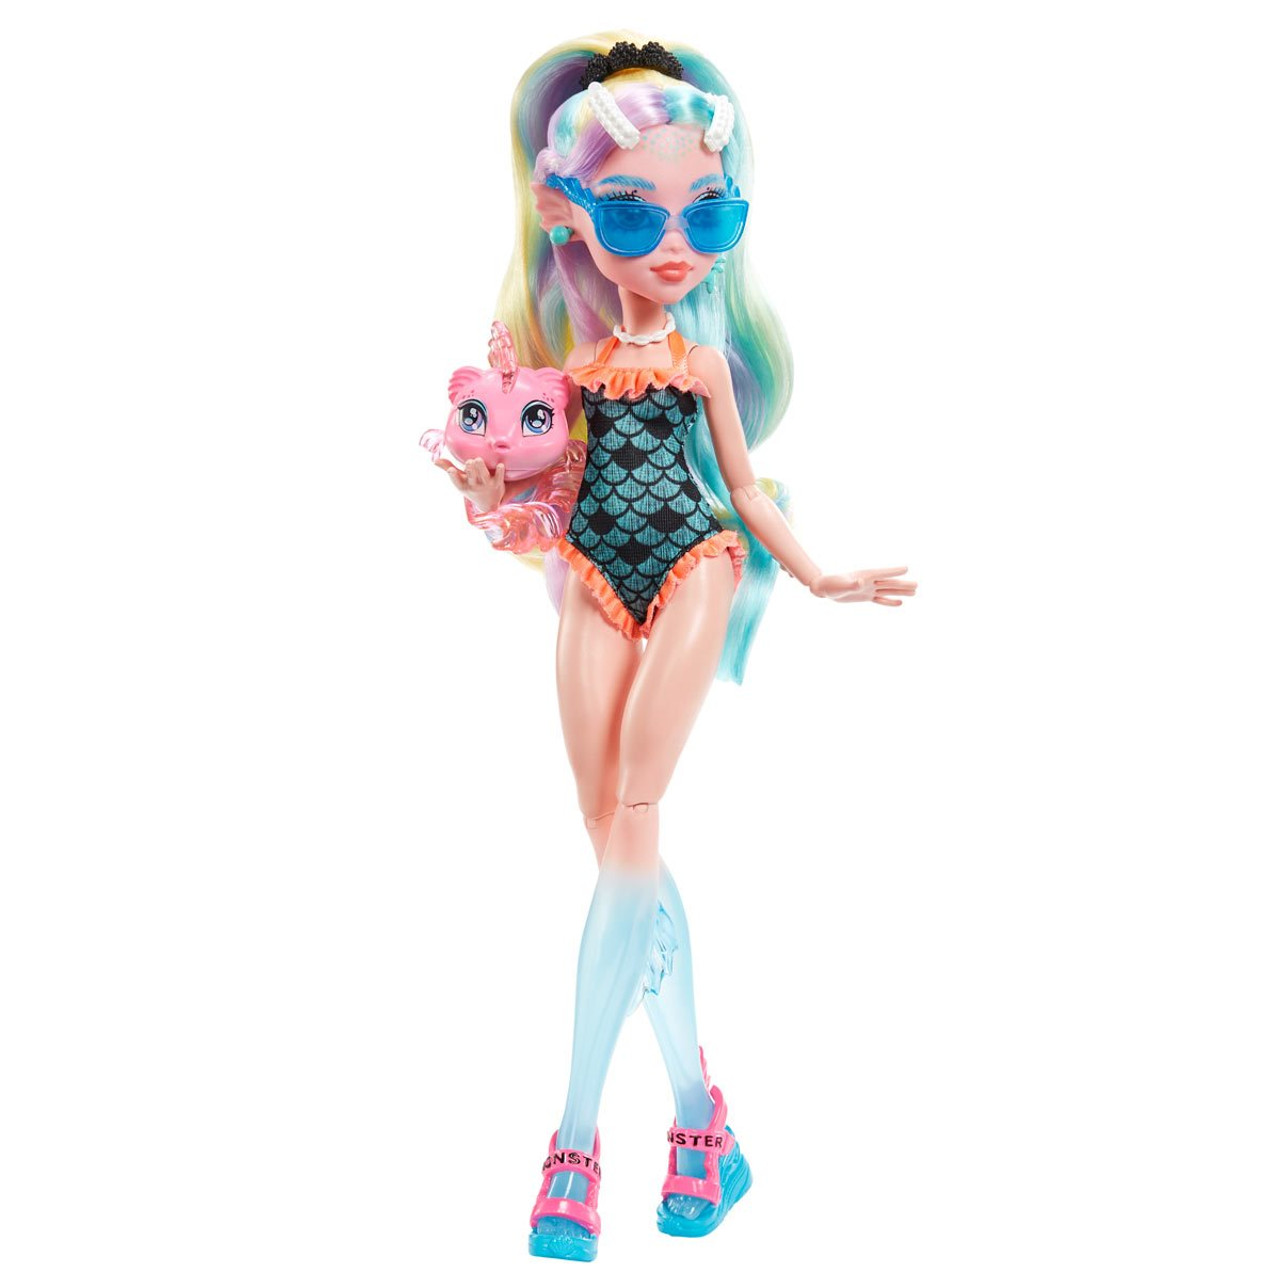 Monster High Ghoulia Yelps Doll, Monster High G3 2022